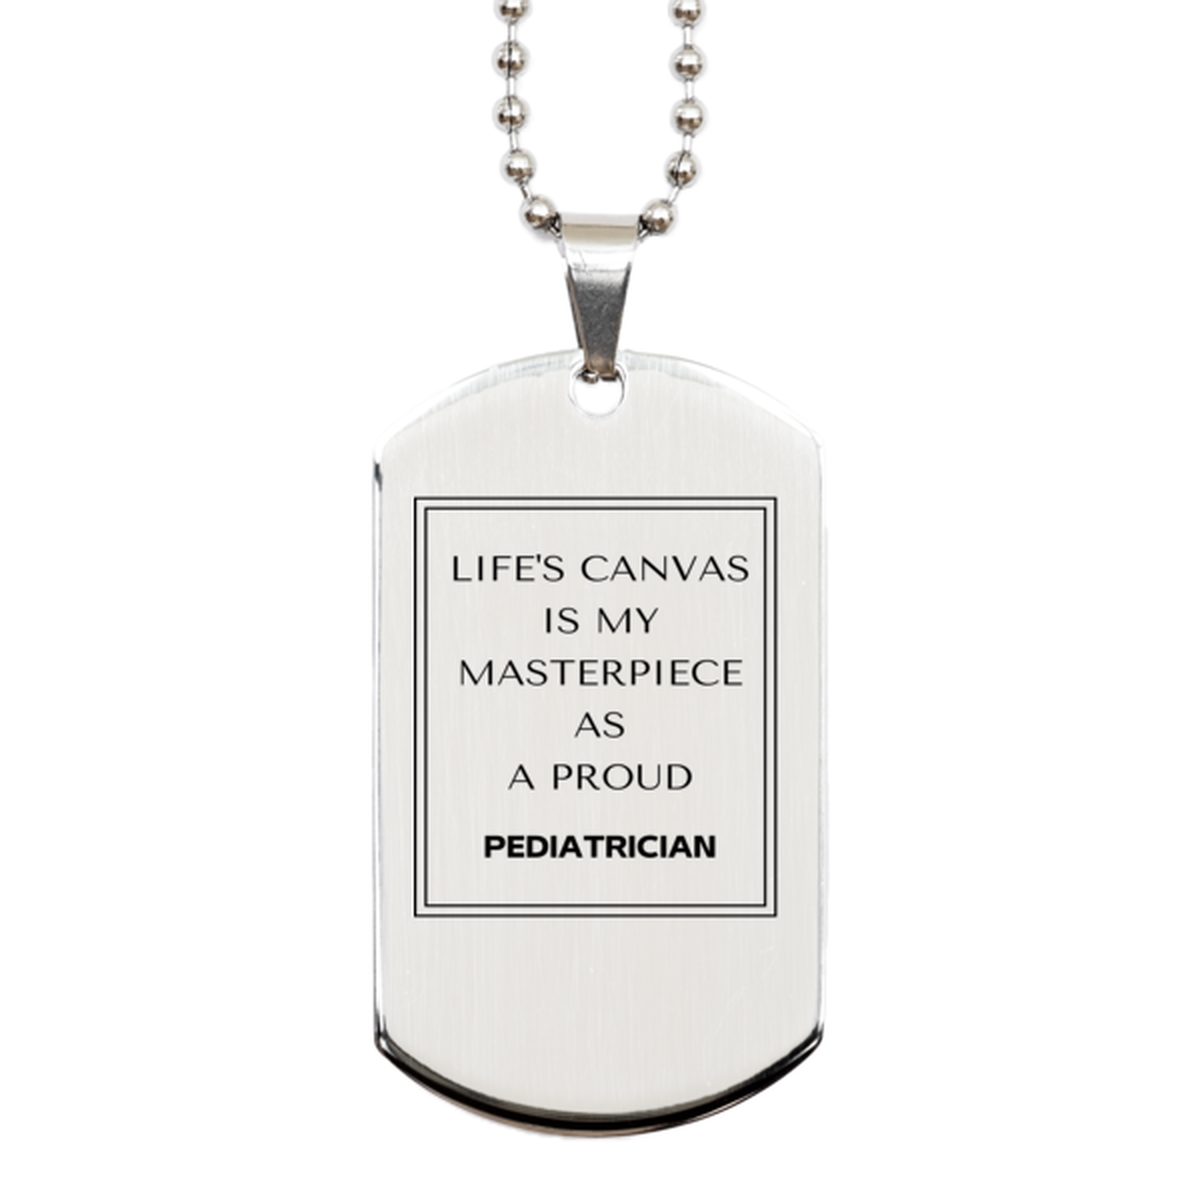 Proud Pediatrician Gifts, Life's canvas is my masterpiece, Epic Birthday Christmas Unique Silver Dog Tag For Pediatrician, Coworkers, Men, Women, Friends